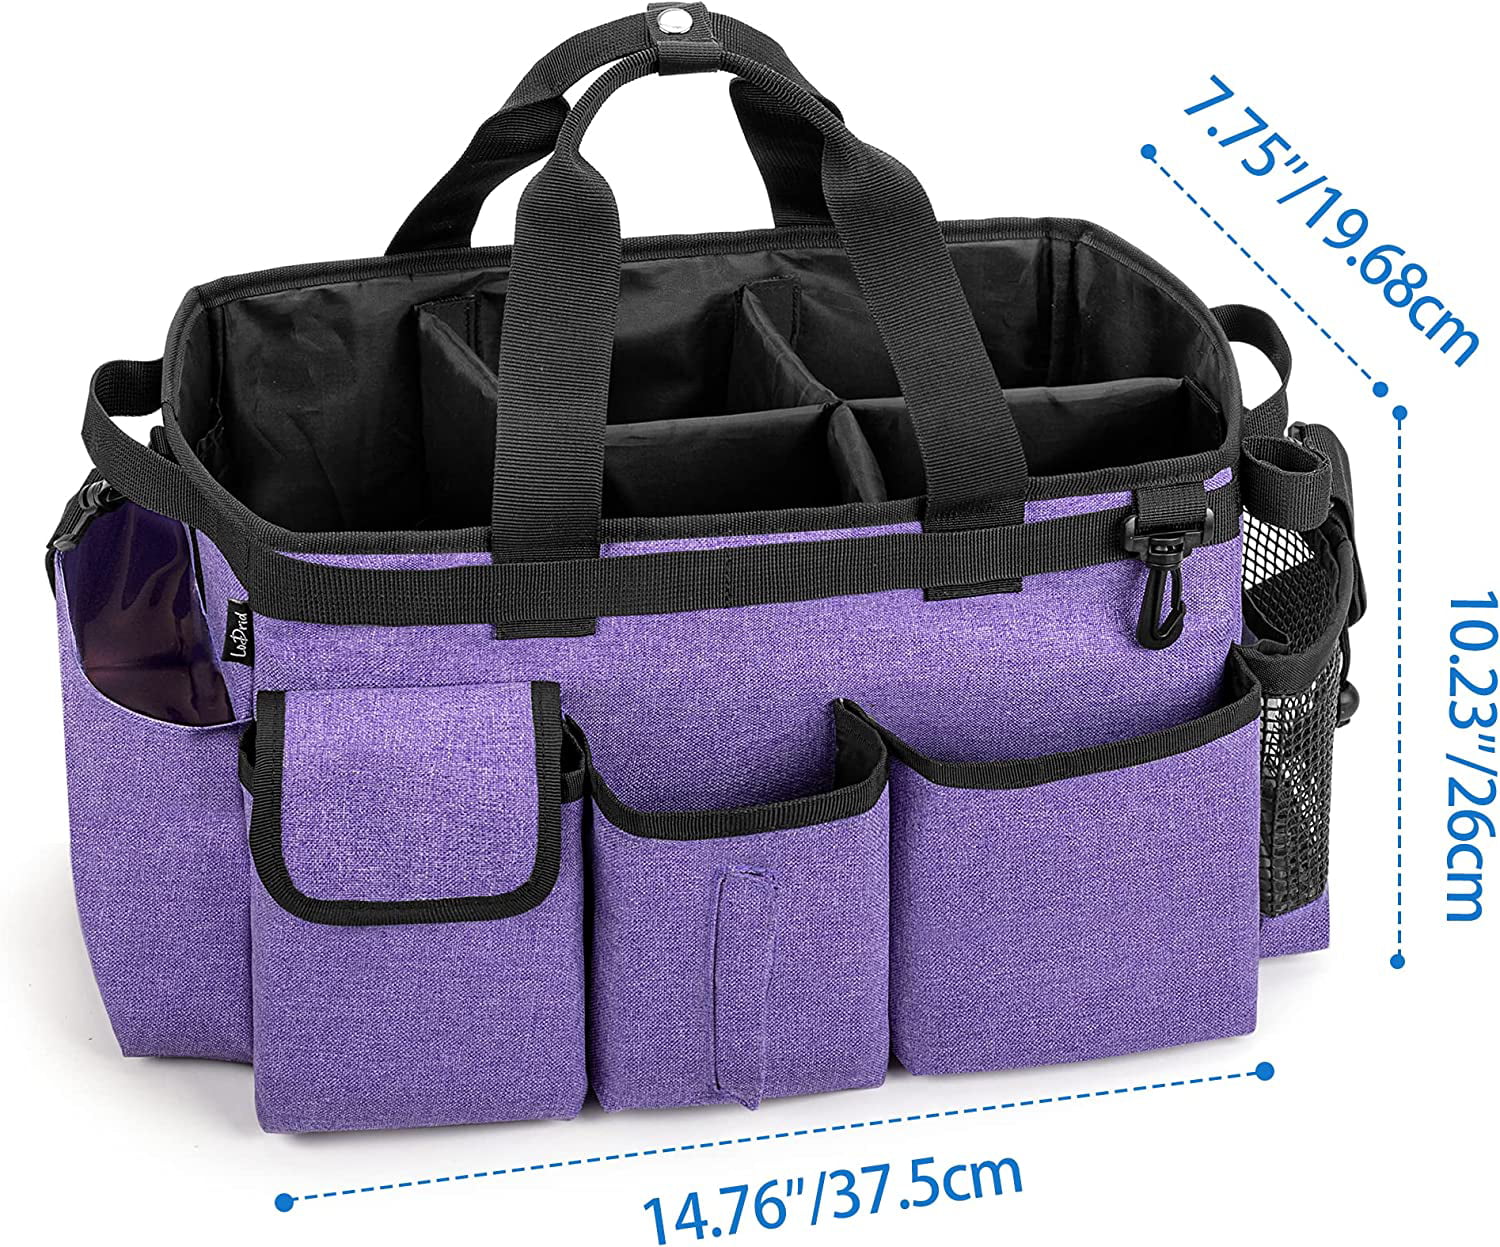  Wearable Cleaning Caddy Bag with Handle, Multi-functional  Cleaning Supplies Caddy Organizer with Handle and Shoulder Strap for Car  Wash, Gardening Tools, Painting/Picnic Items, Beach (Purple)